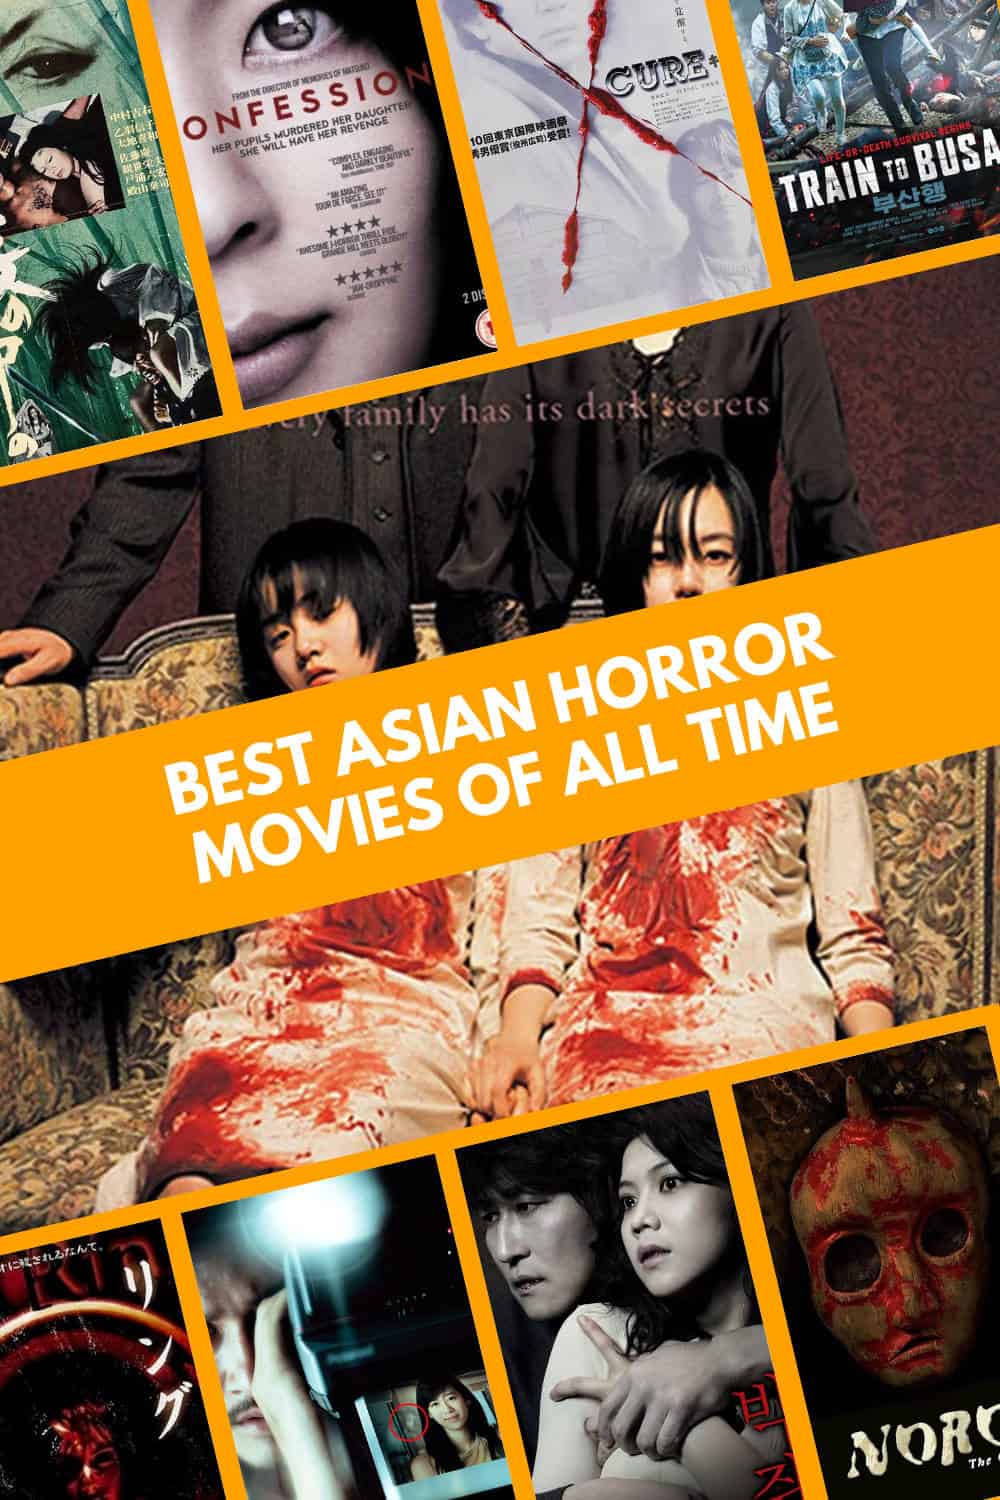 Asian Horror Movies of All Time